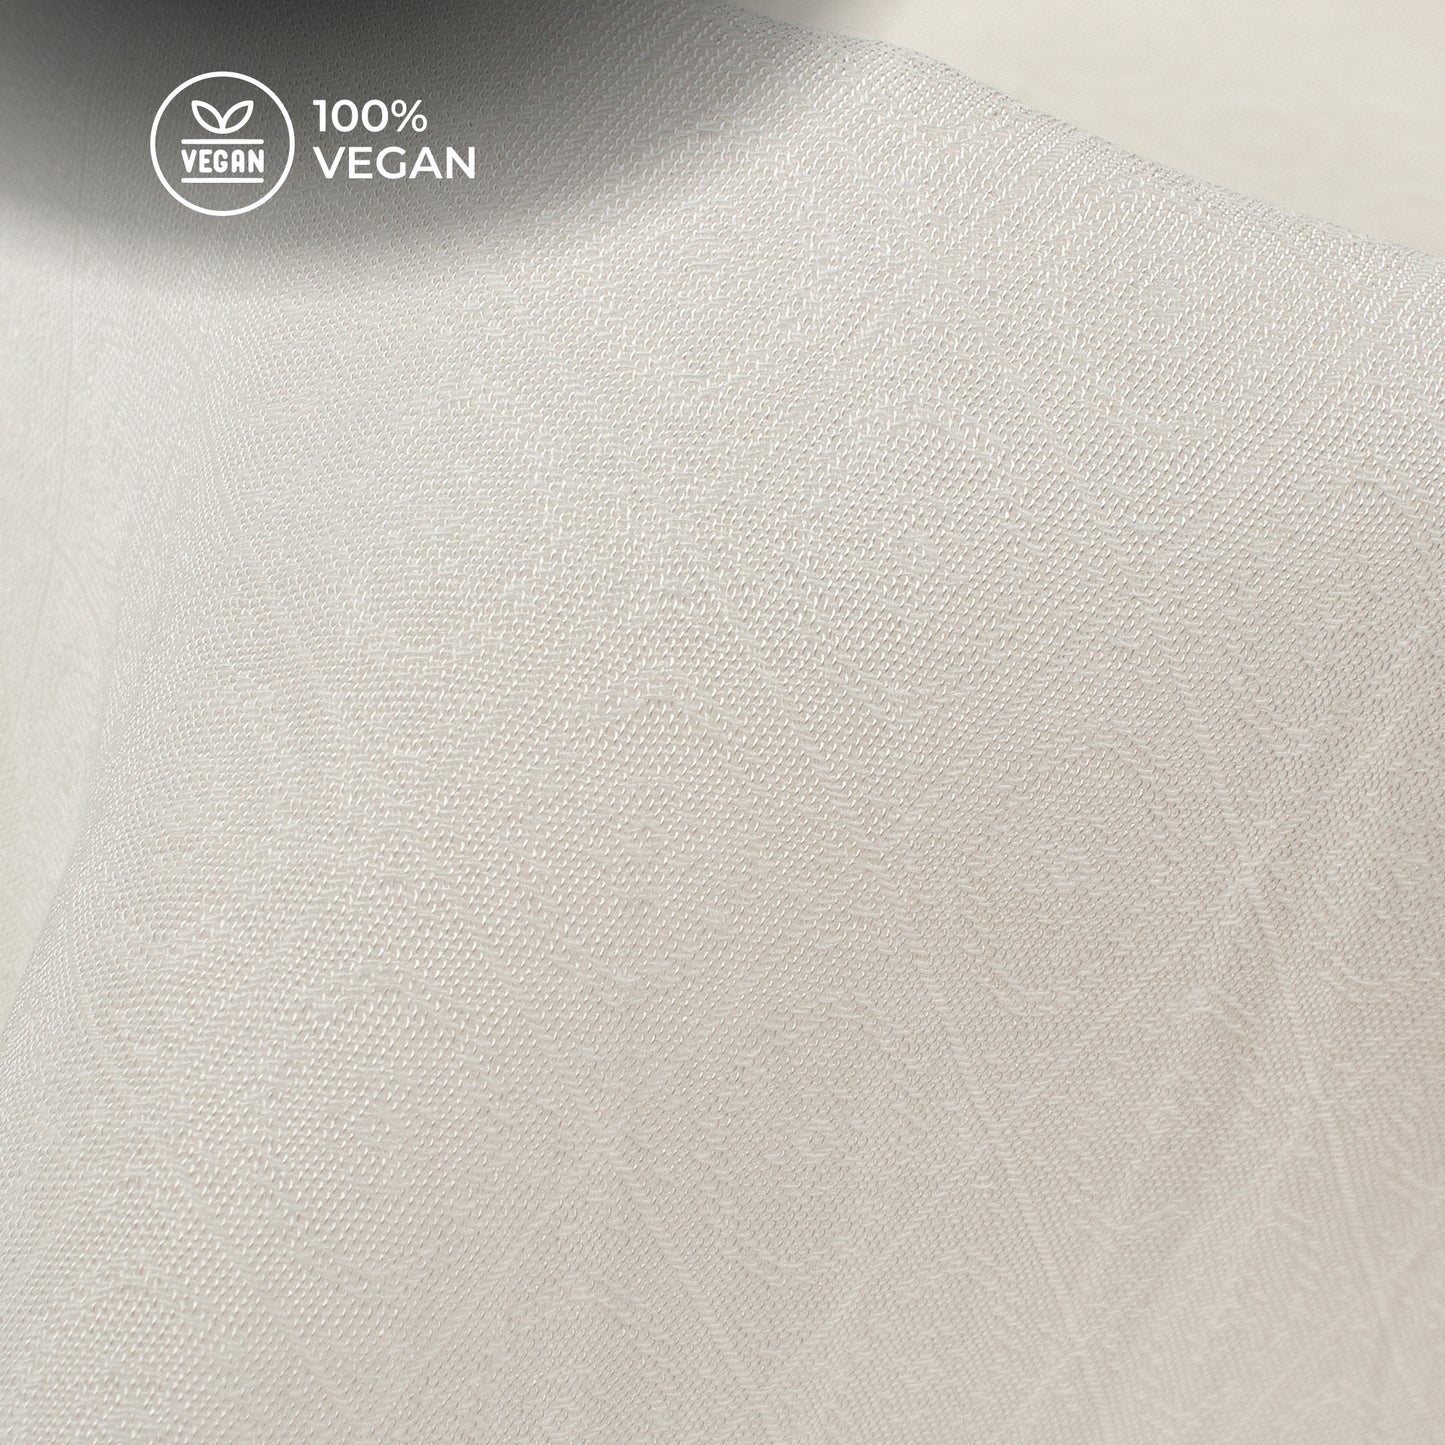 White Dyeable Sustainable Corn Fabric